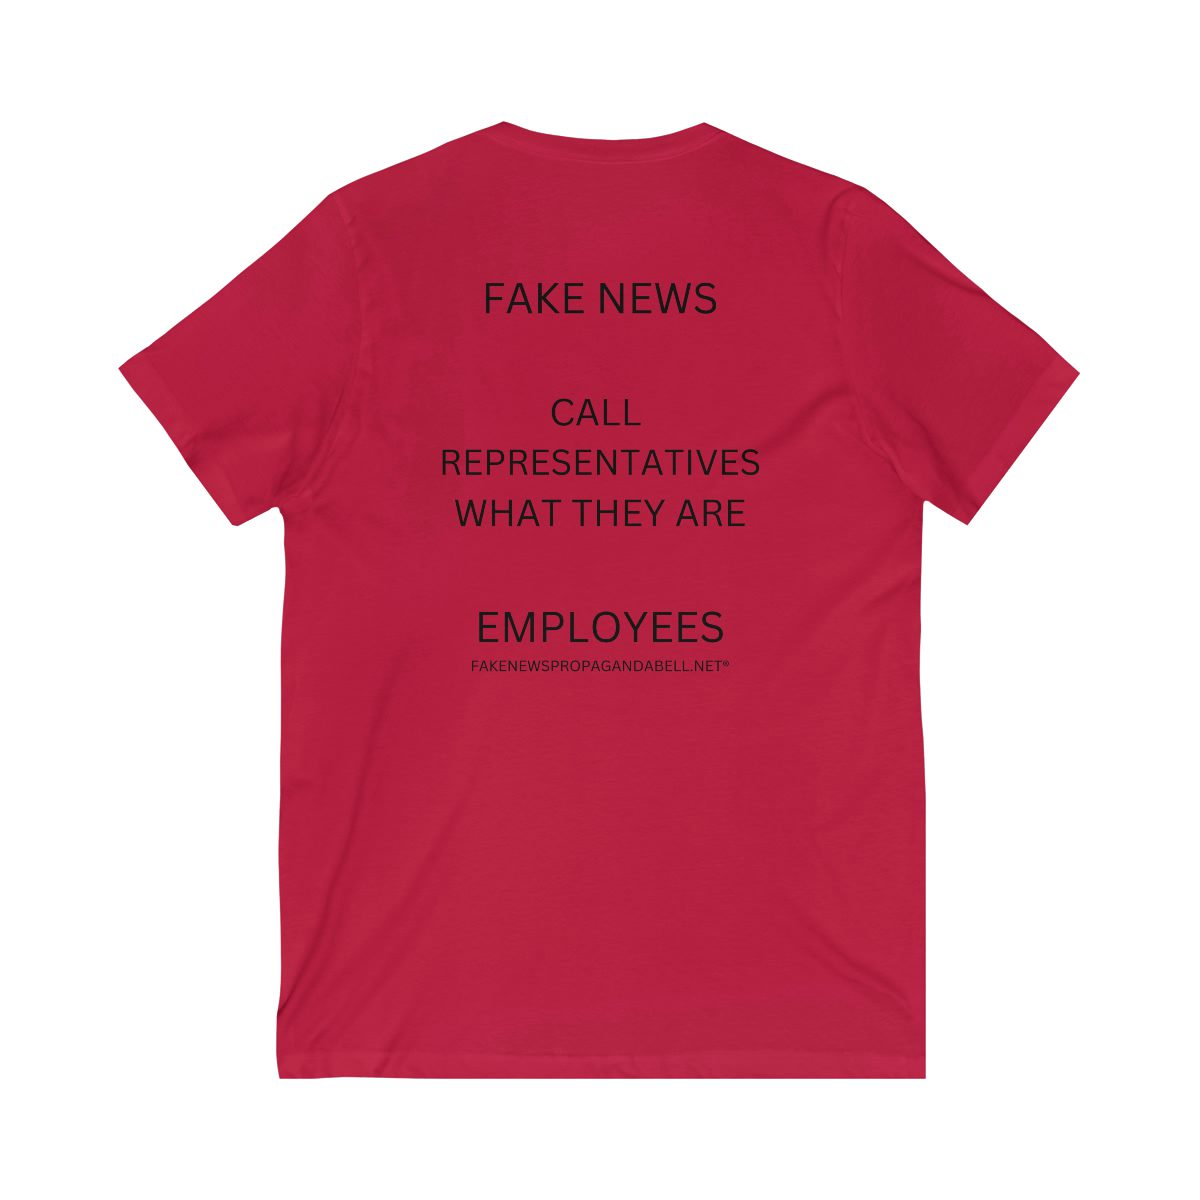 CALL REPRESENTATIVES WHAT THEY ARE… Unisex Jersey Short Sleeve V-Neck Tee